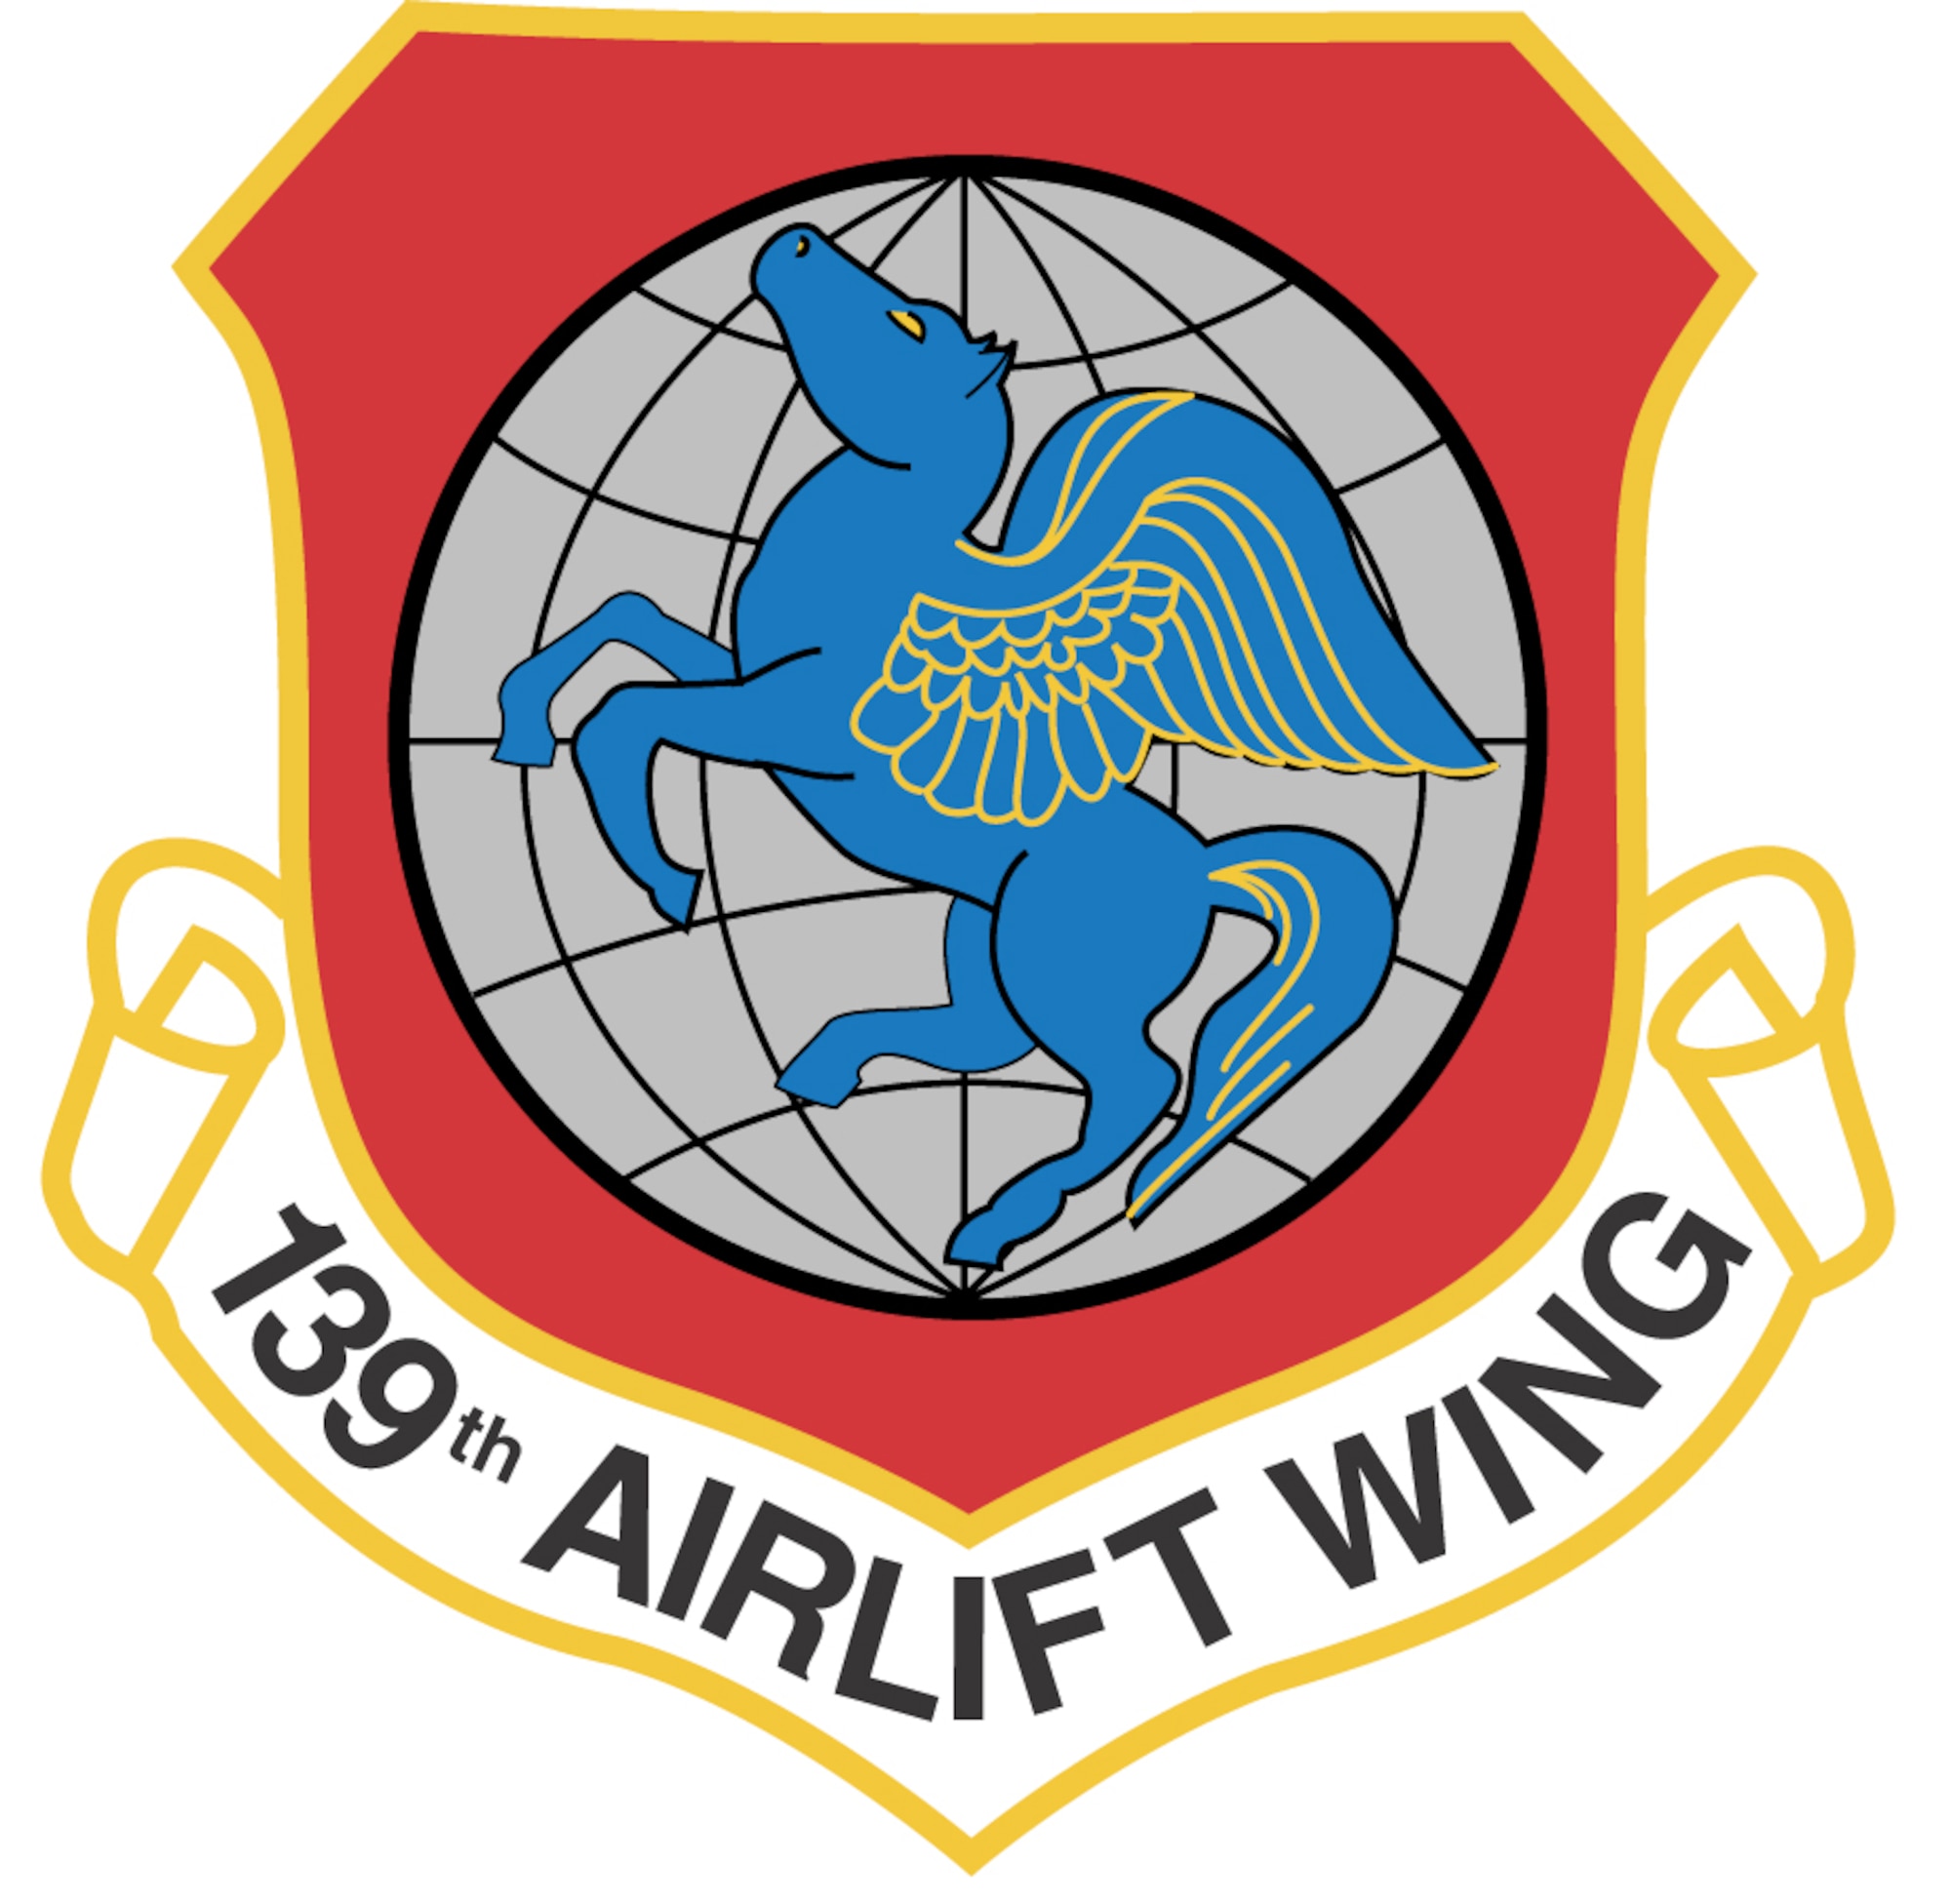 139th Airlift Wing shield.